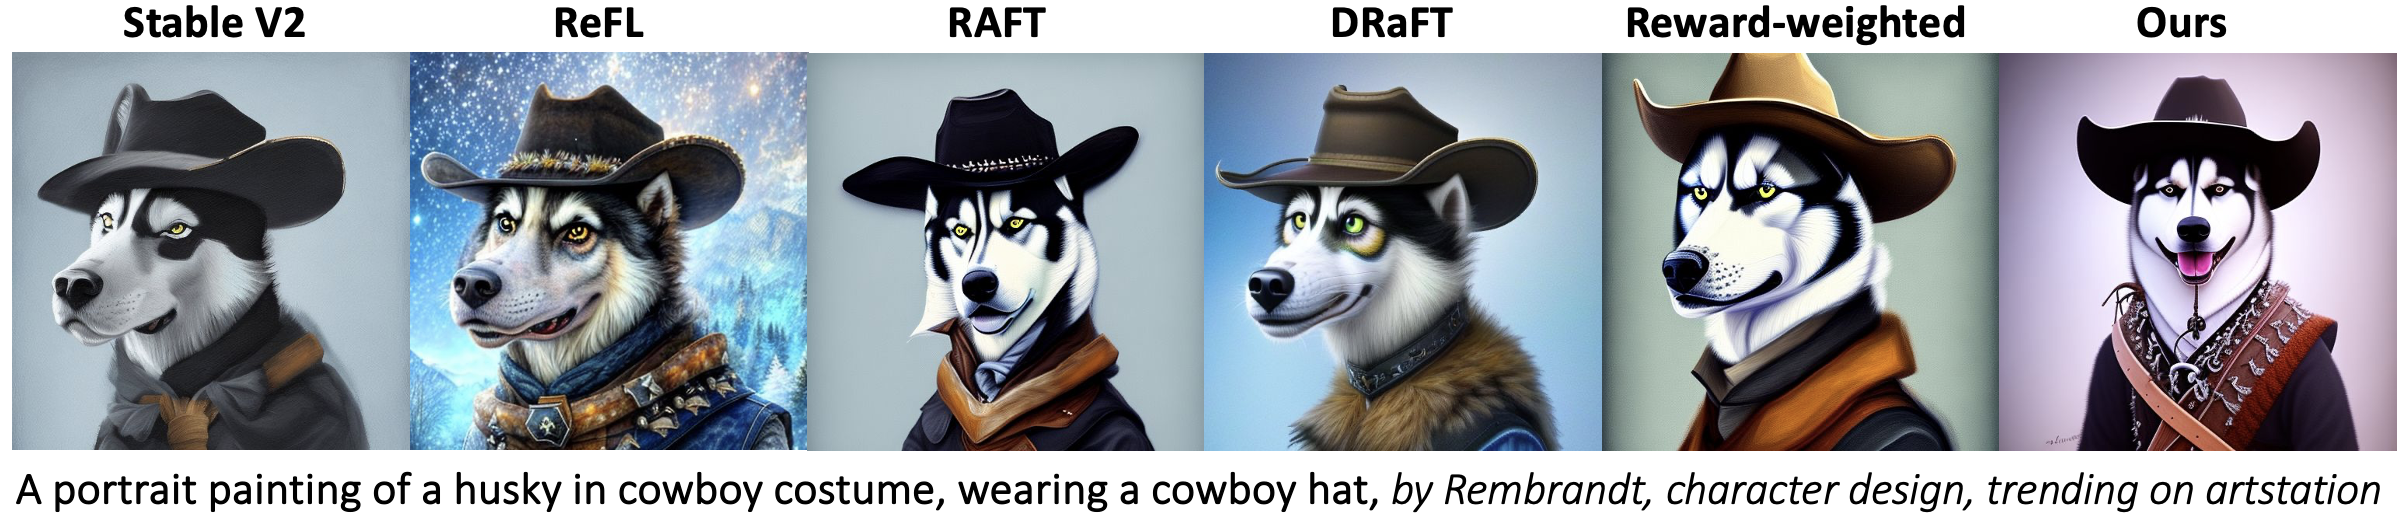 A portrait painting of a husky in cowboy costume, wearing a cowboy hat, by Rembrandt, character design, trending on artstation